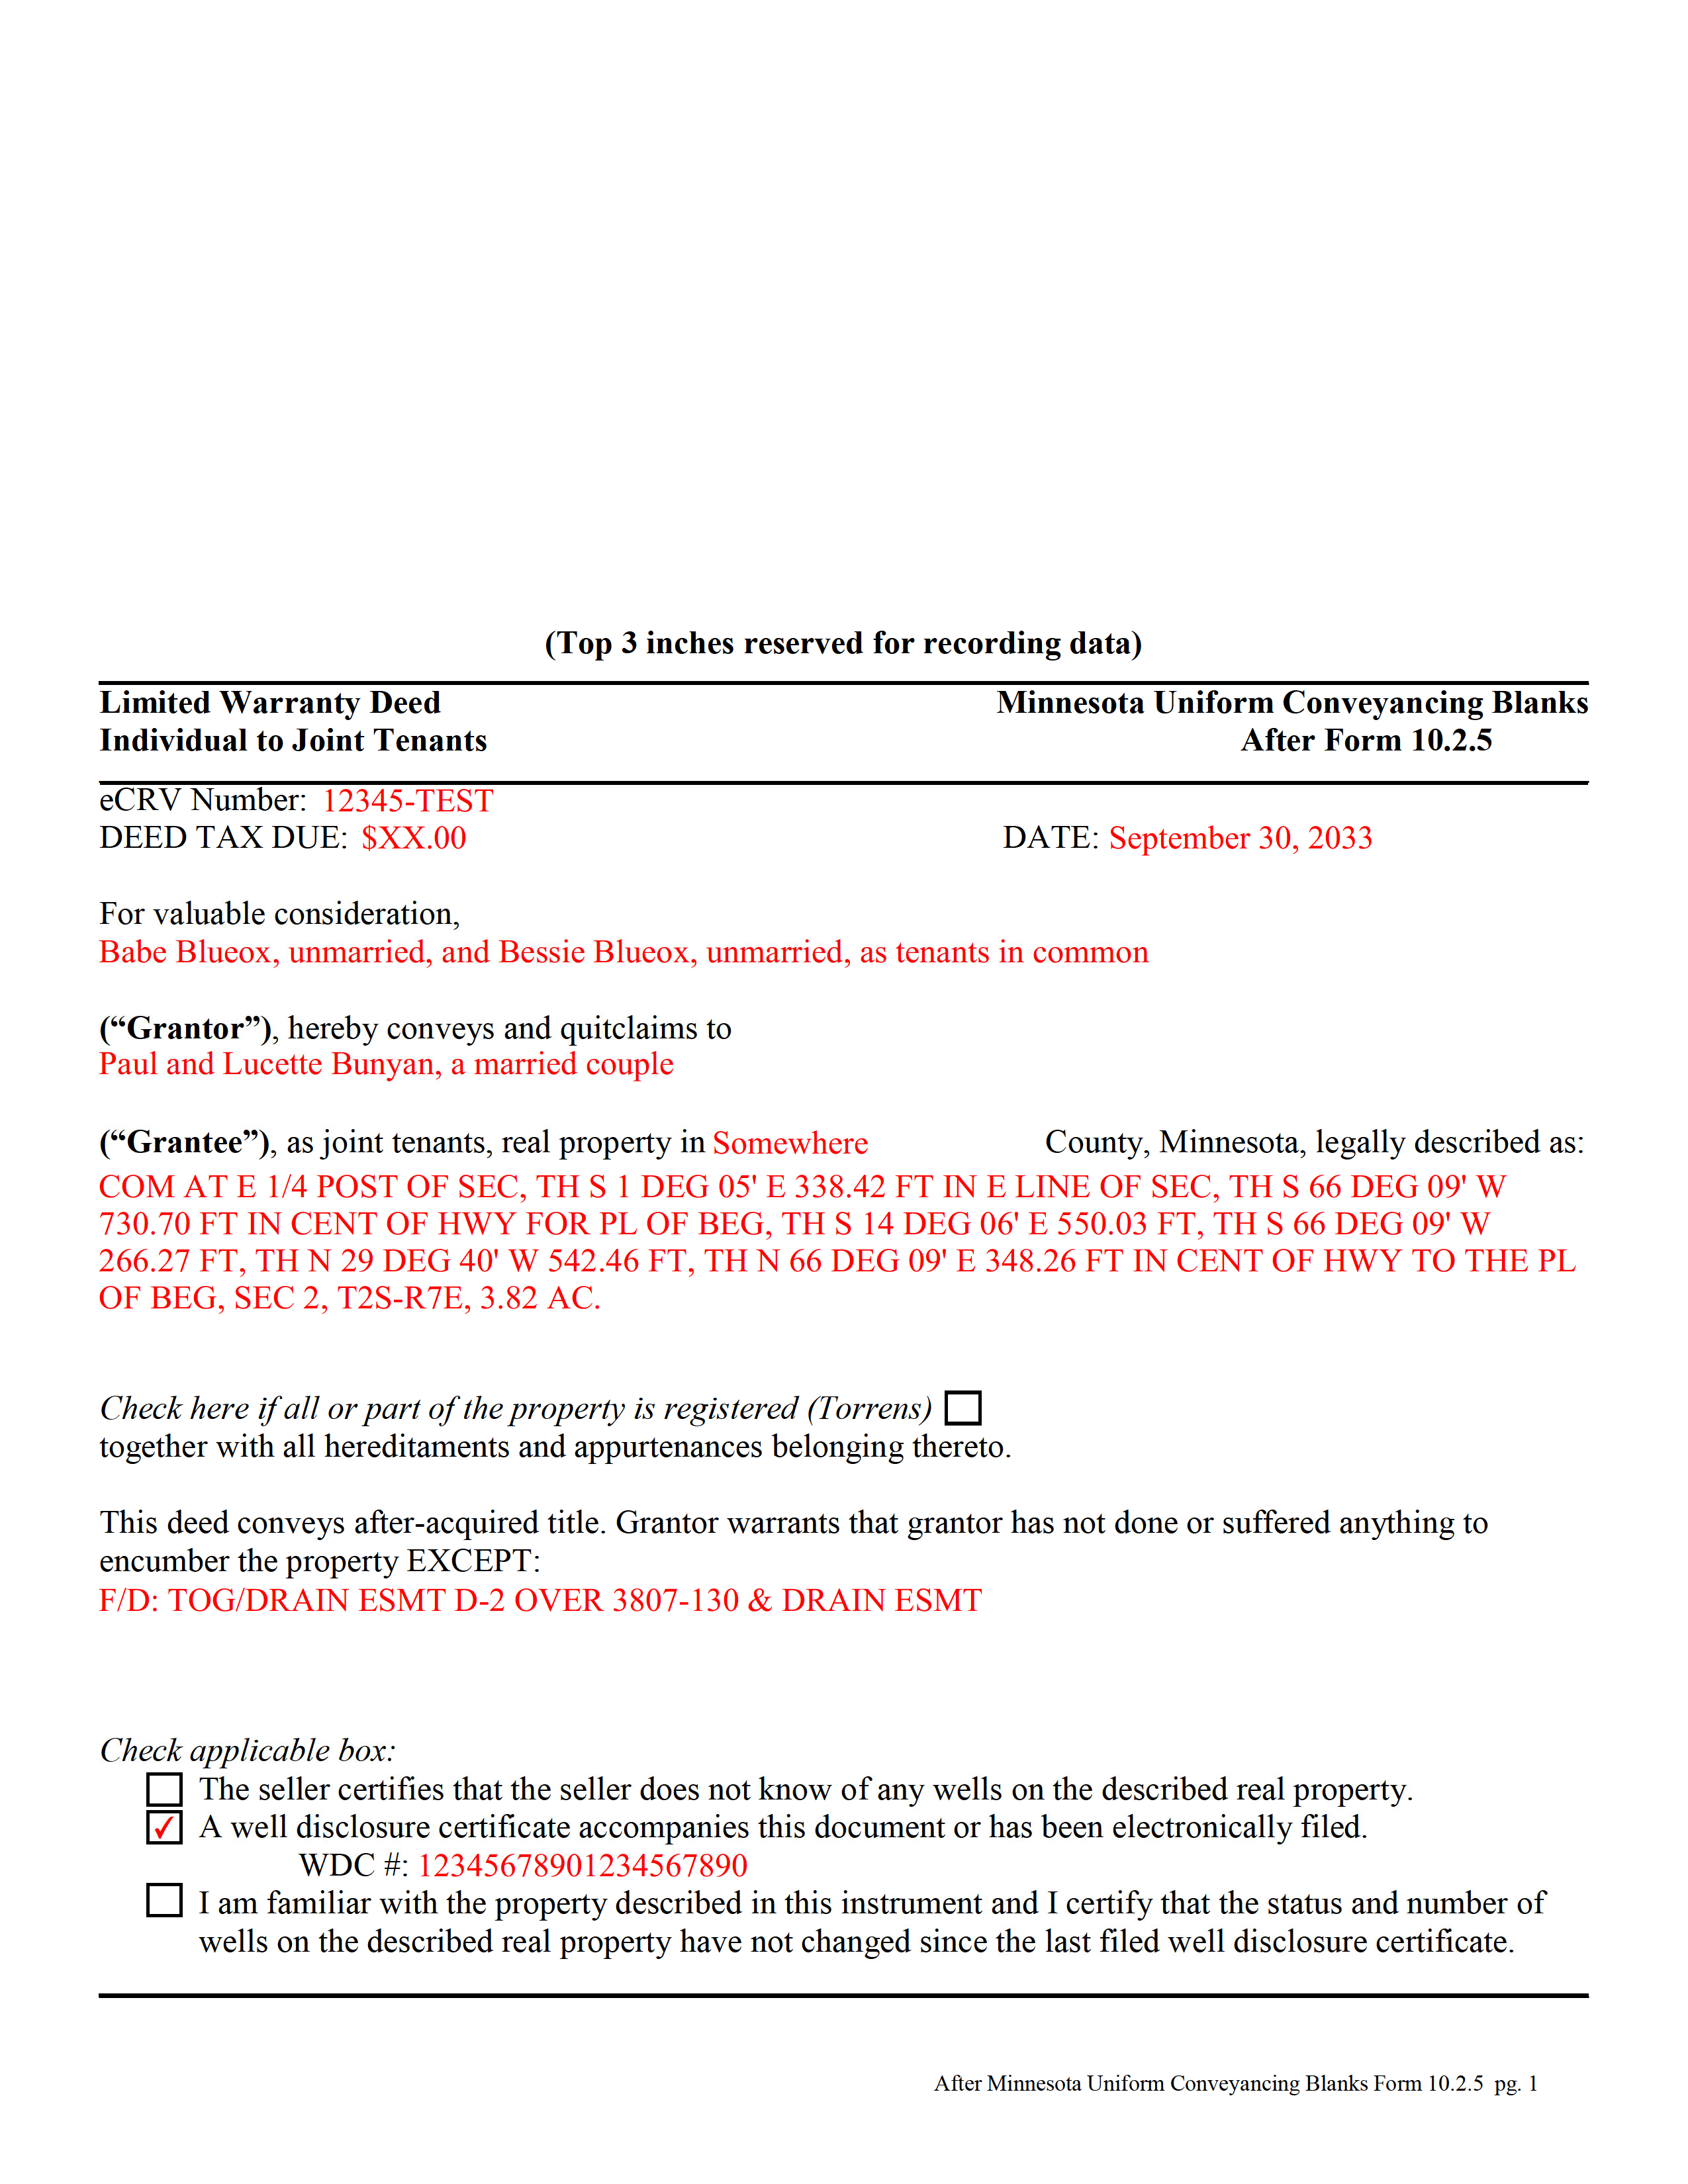 Completed Example of the Limited Warranty Deed from Individual to Joint Tenant Document